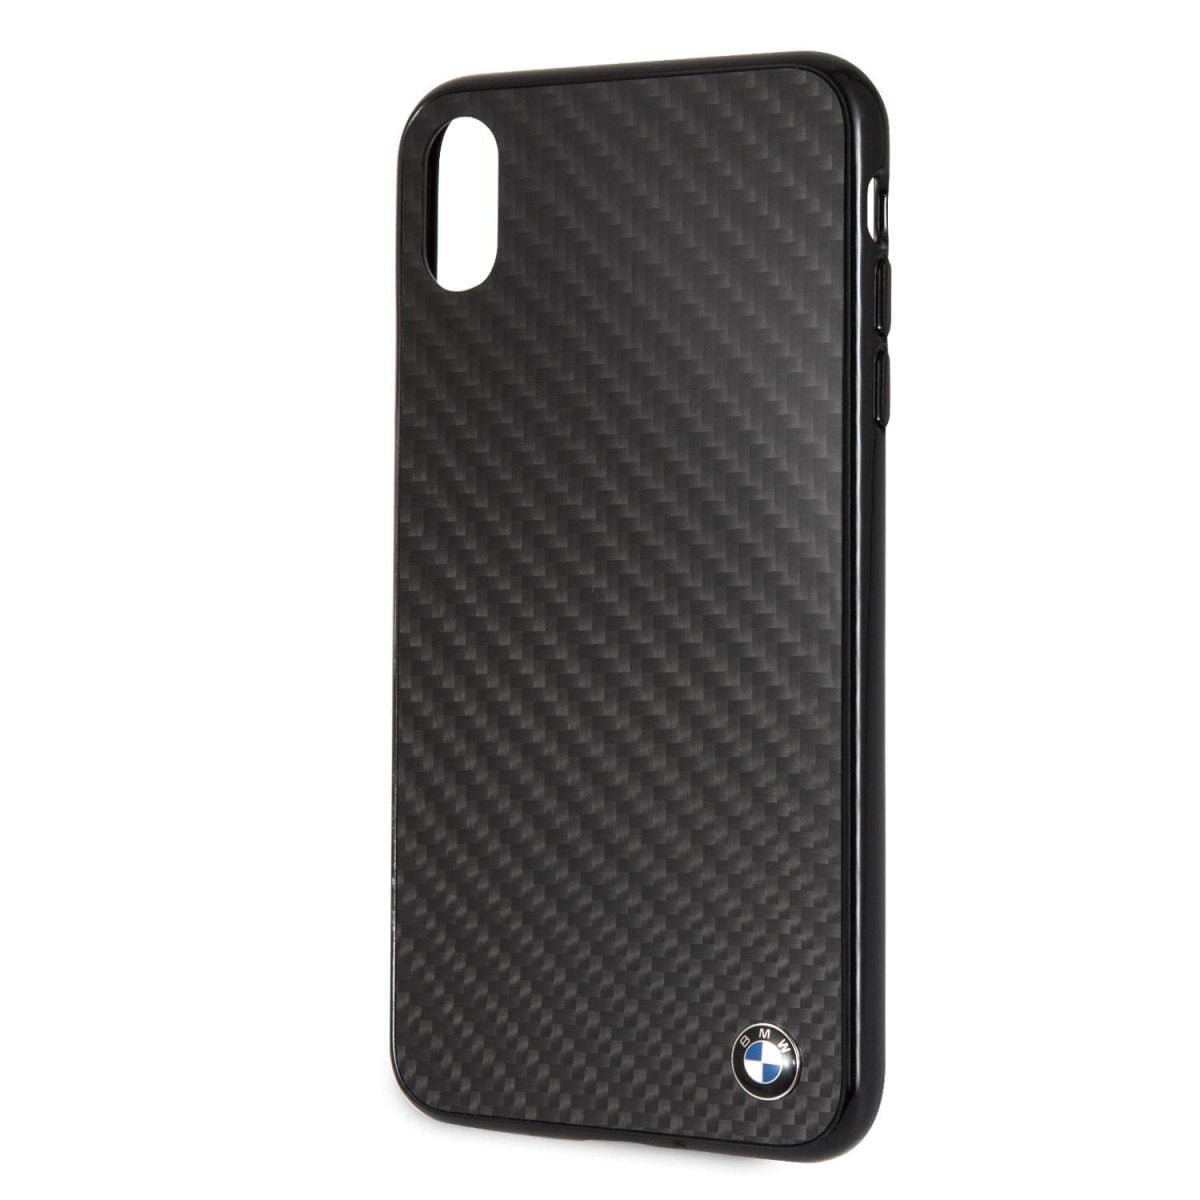 Cg Mobile Bmw Iphone Xs Max Case Black Carbon Hard Cell Phone Case Carbon Fiber Easily Accessible Ports Officially Licensed 03 Iphone Case Iphone Xs Max Black Carbon Fiber (Bmw)